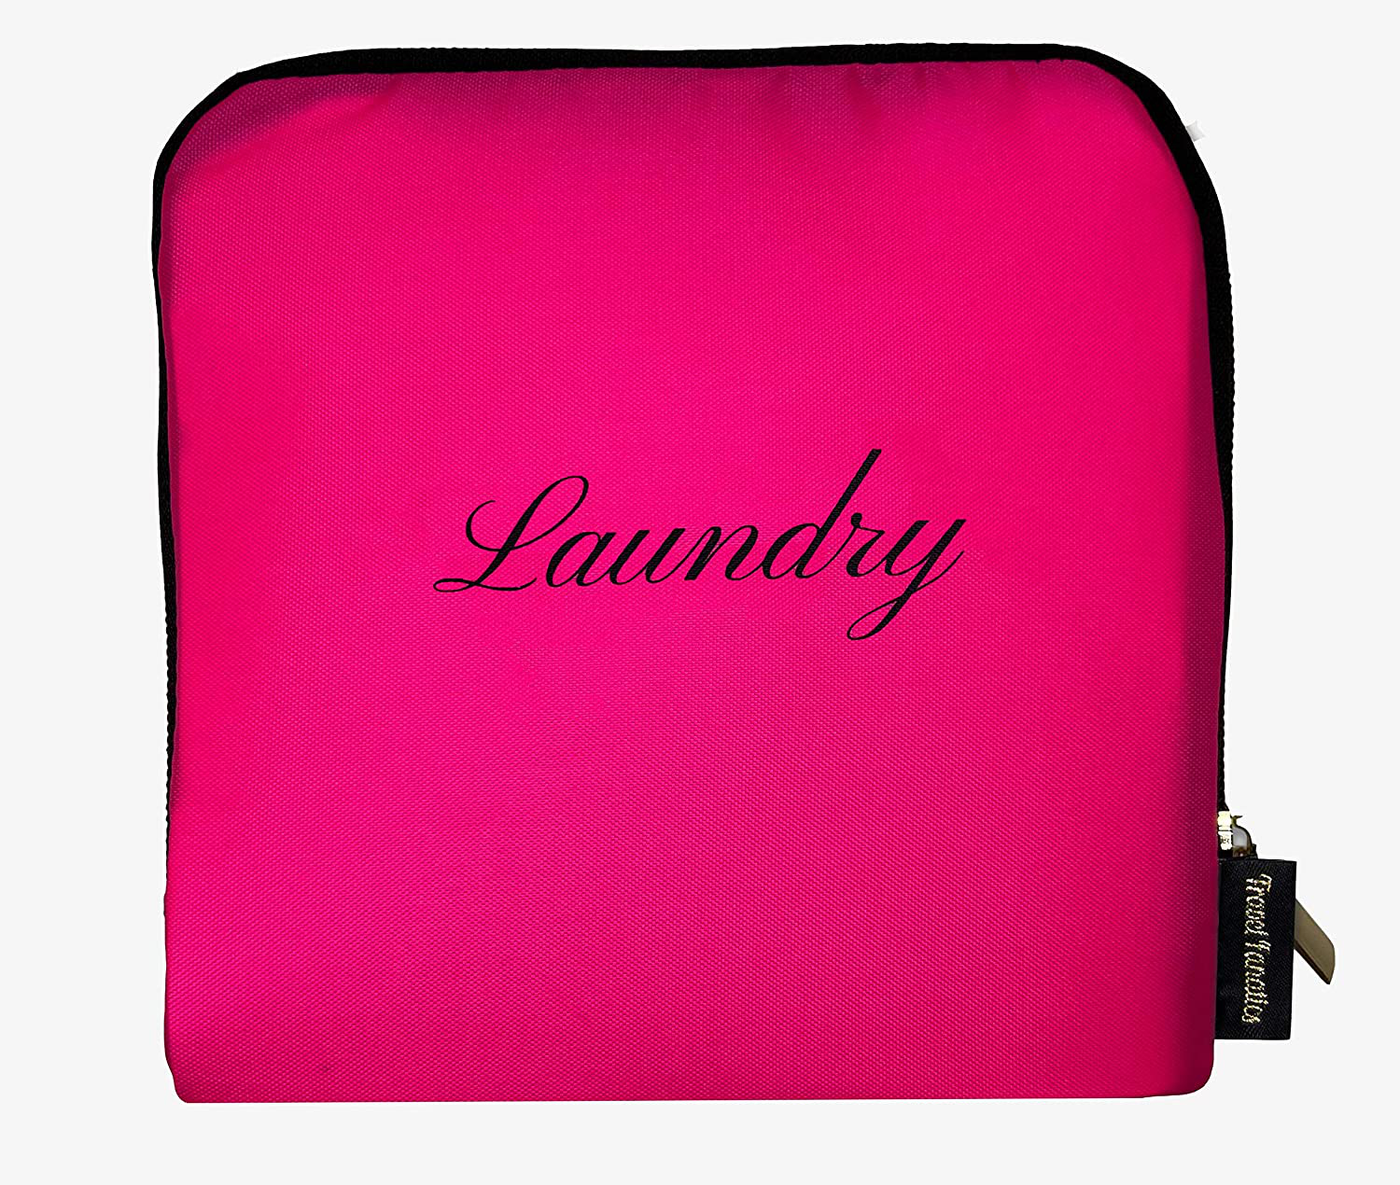 Travel Fanatics Travel Essentials Waterproof Travel Laundry Bag for Dirty Clothes Bag for Traveling with Zipper and Drawstring, Travel Laundry Bags for Dirty Clothes, Travel Accessories - Pink